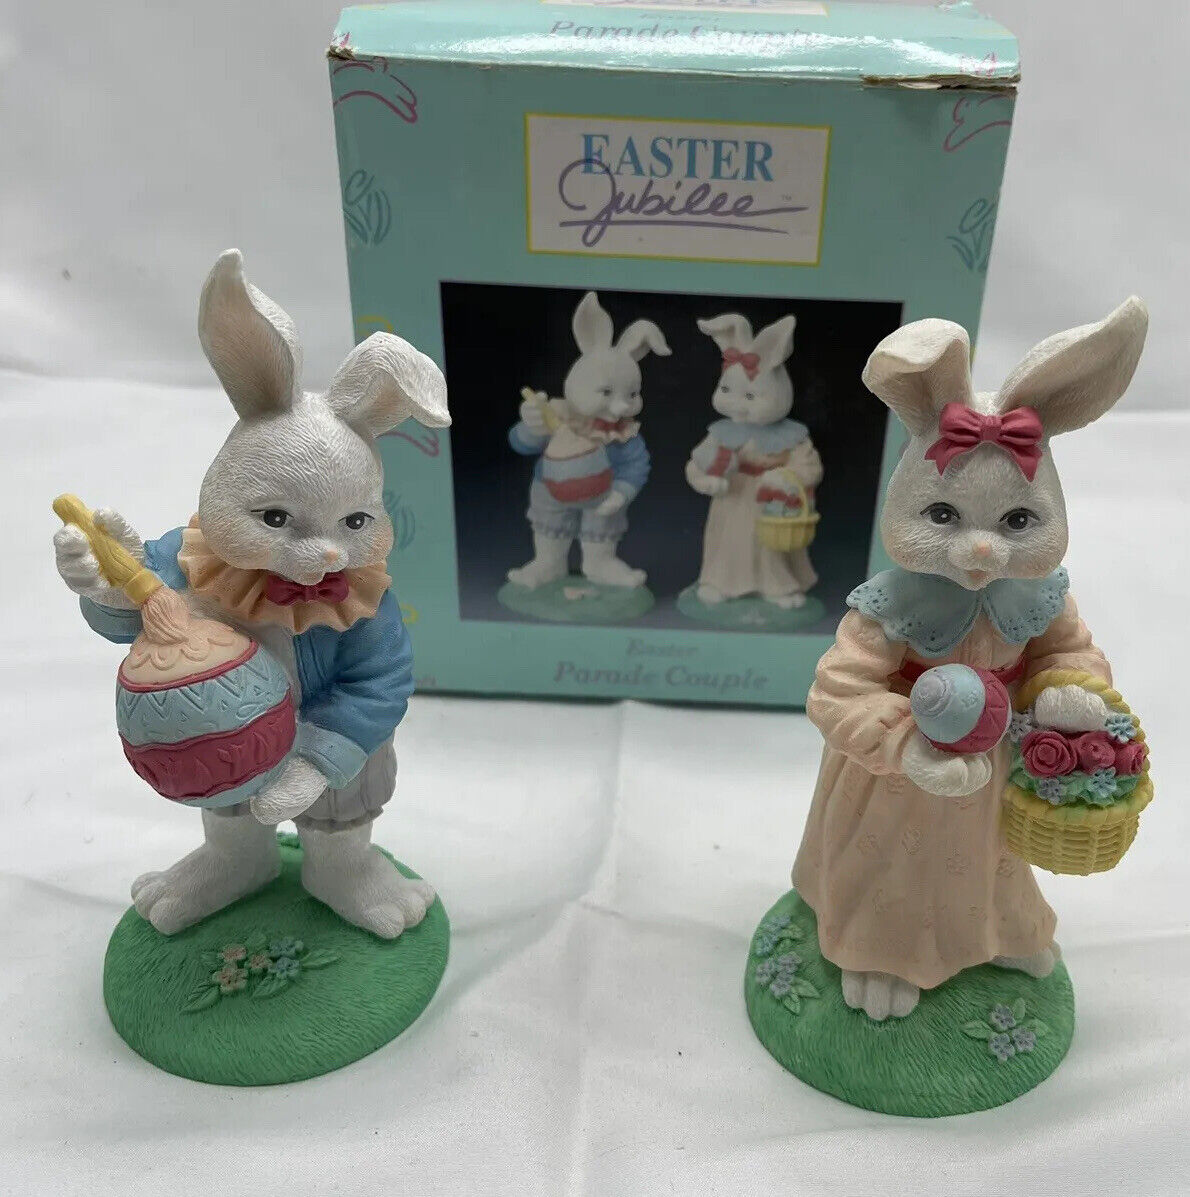 VINTAGE EASTER JUBILEE  EASTER PARADE COUPLE with ORIGINAL BOX 